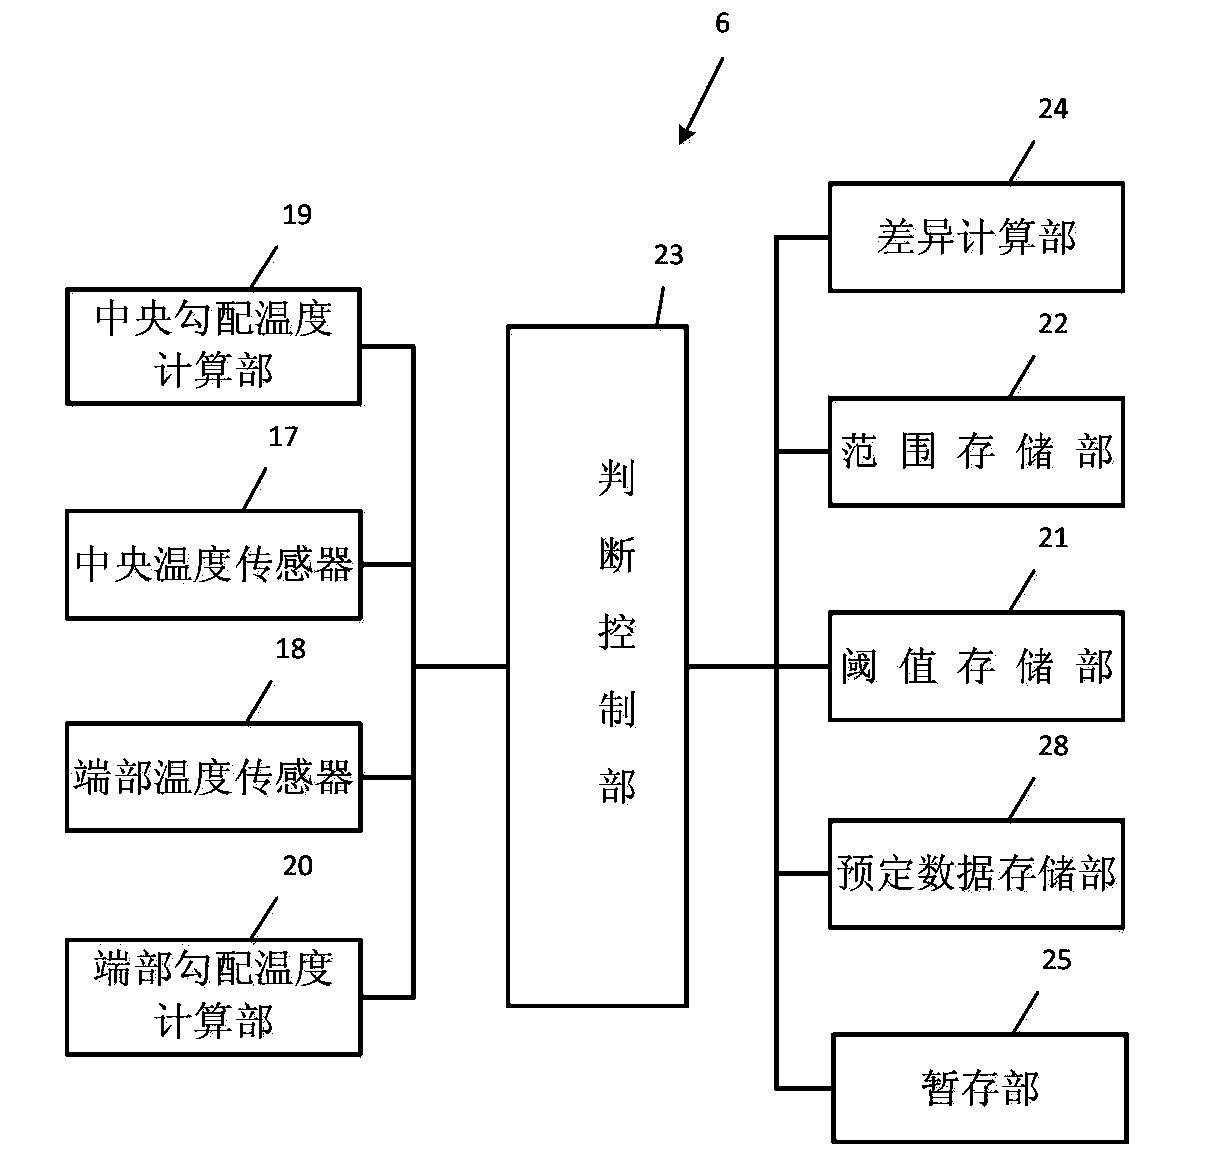 Detection device for fixing apparatus state and image formation device